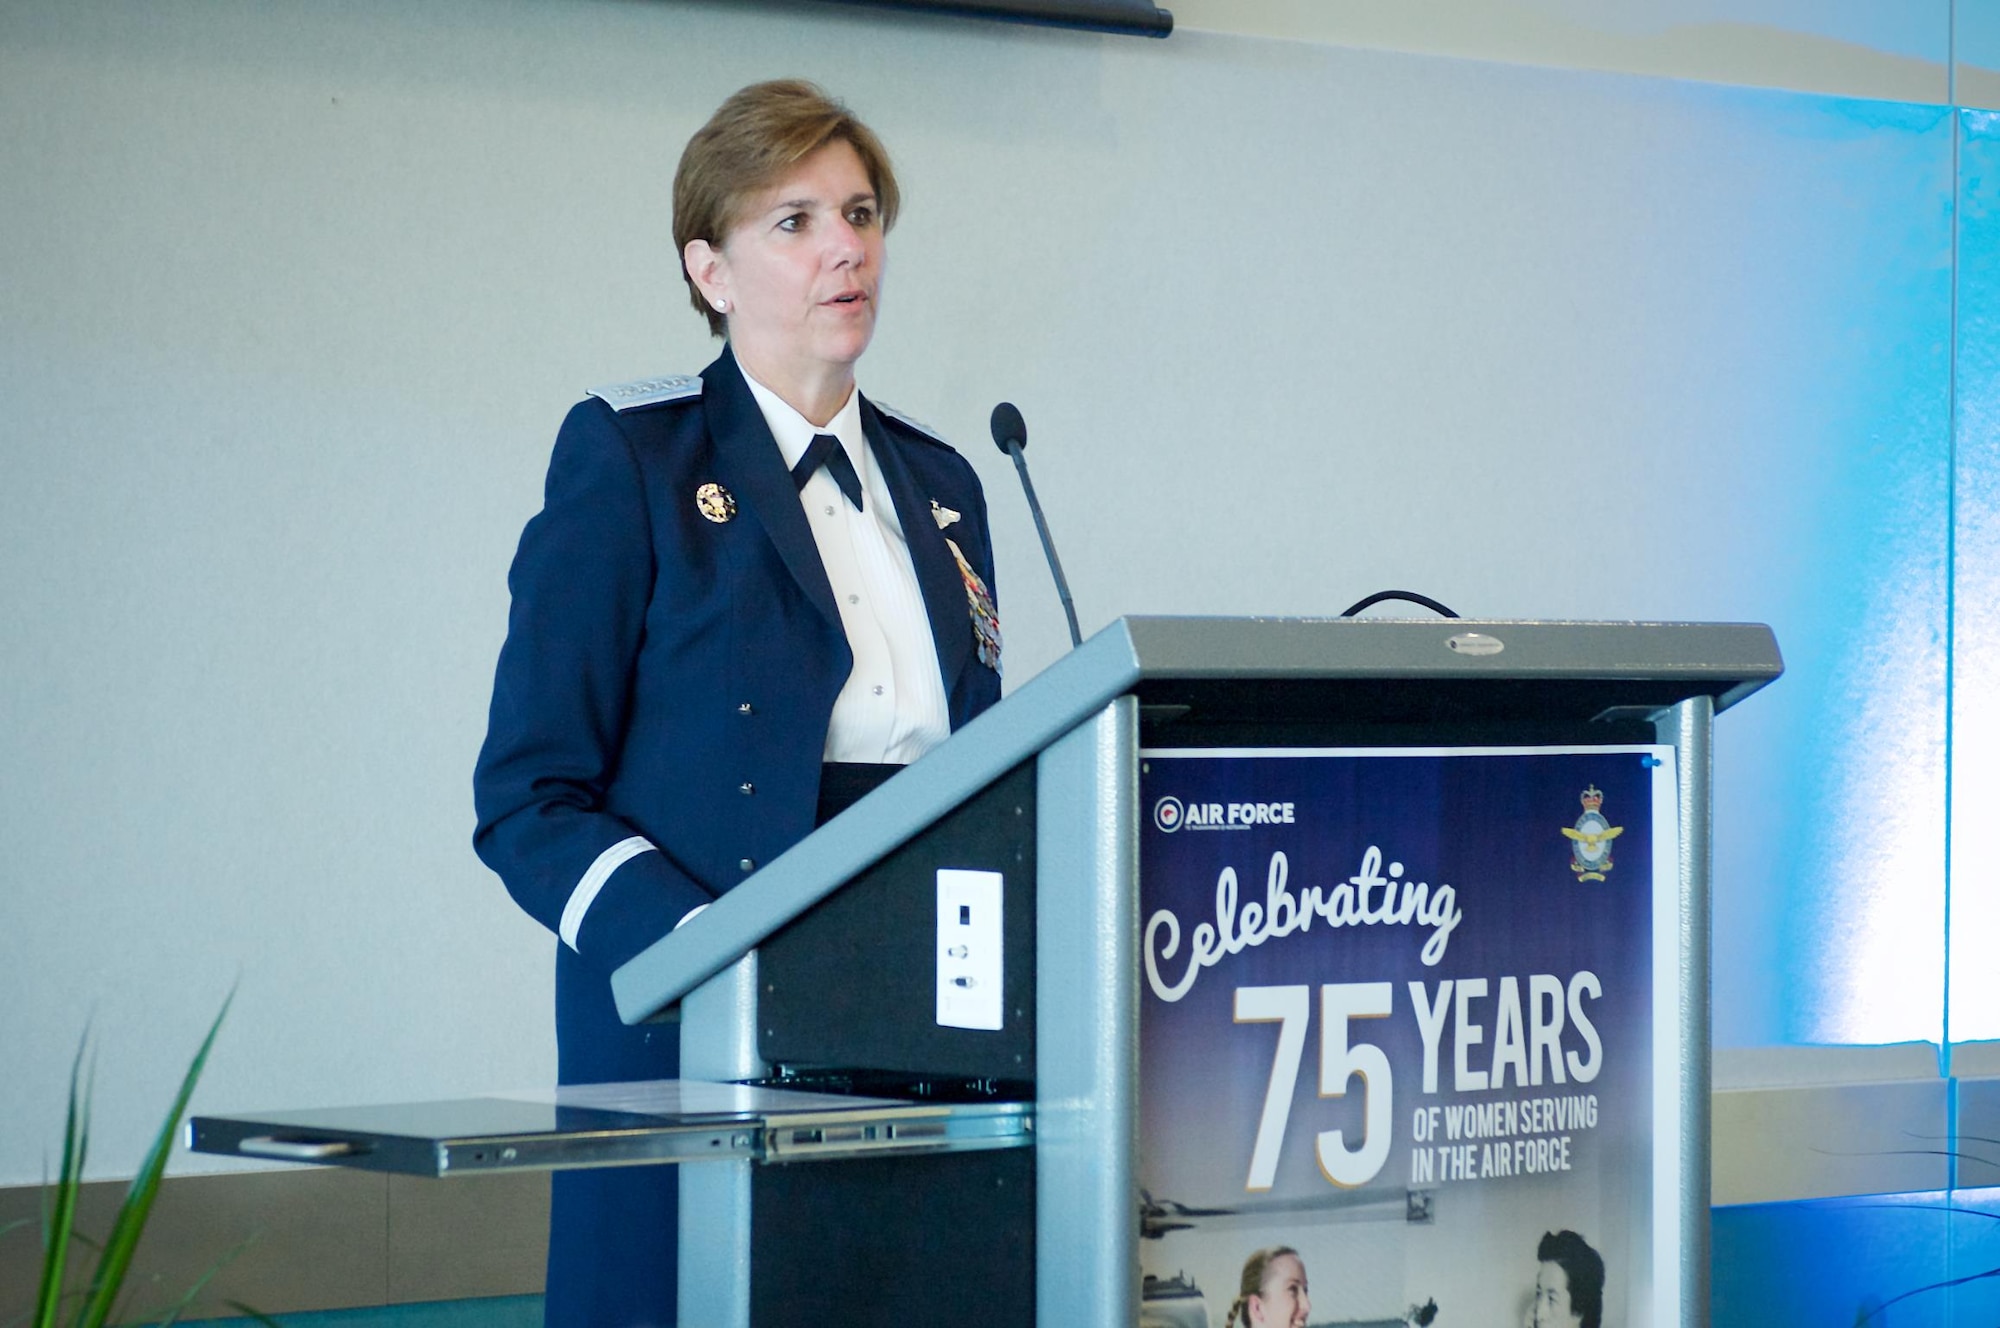 Gen. Lori Robinson, Pacific Air Forces commander, gives remarks to veterans and Royal New Zealand Air Force service members at the 75 Years of Women in Service celebration at RNZAF Base Ohakea, New Zealand, March 4, 2016. The visit to RNZAF Base Ohakea was part of Robinson’s two-week visit to New Zealand and Australia, which served to improve relations with both nations and reaffirmed PACAF’s commitment to the rebalance in the Pacific. (RNZAF courtesy photo)